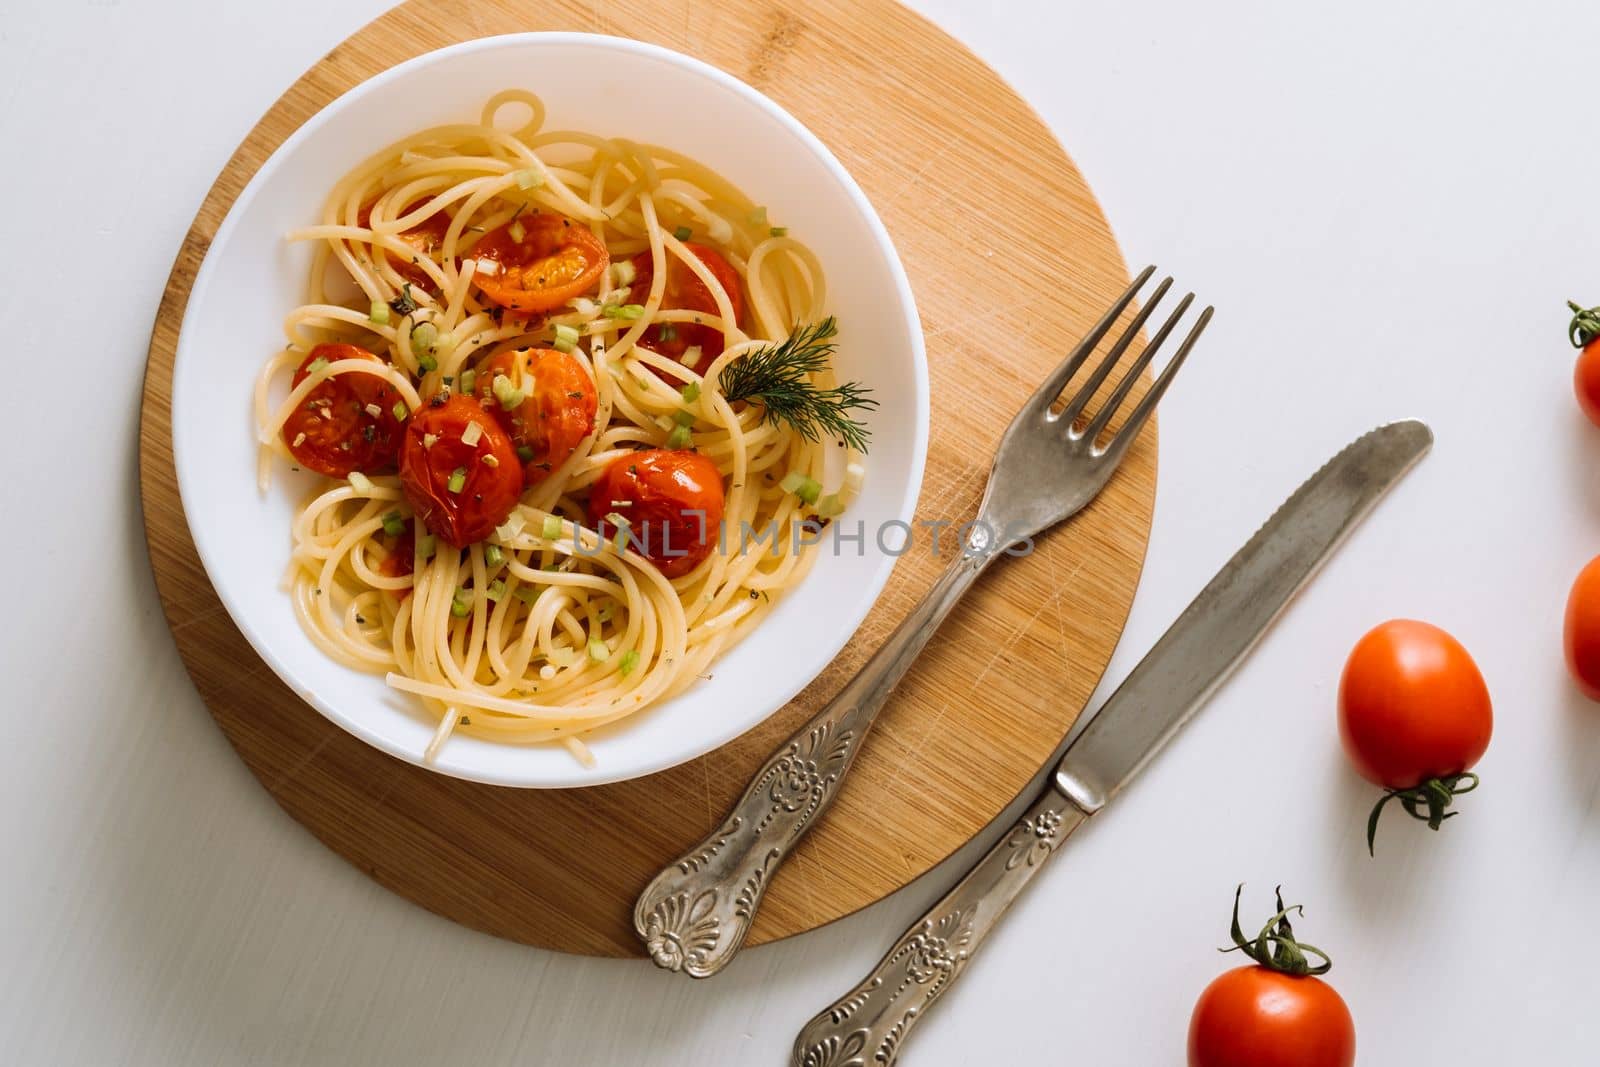 Flat lay portion of spaghetti pasta with cherry tomatoes sprinkled with spices in a plate on wooden board